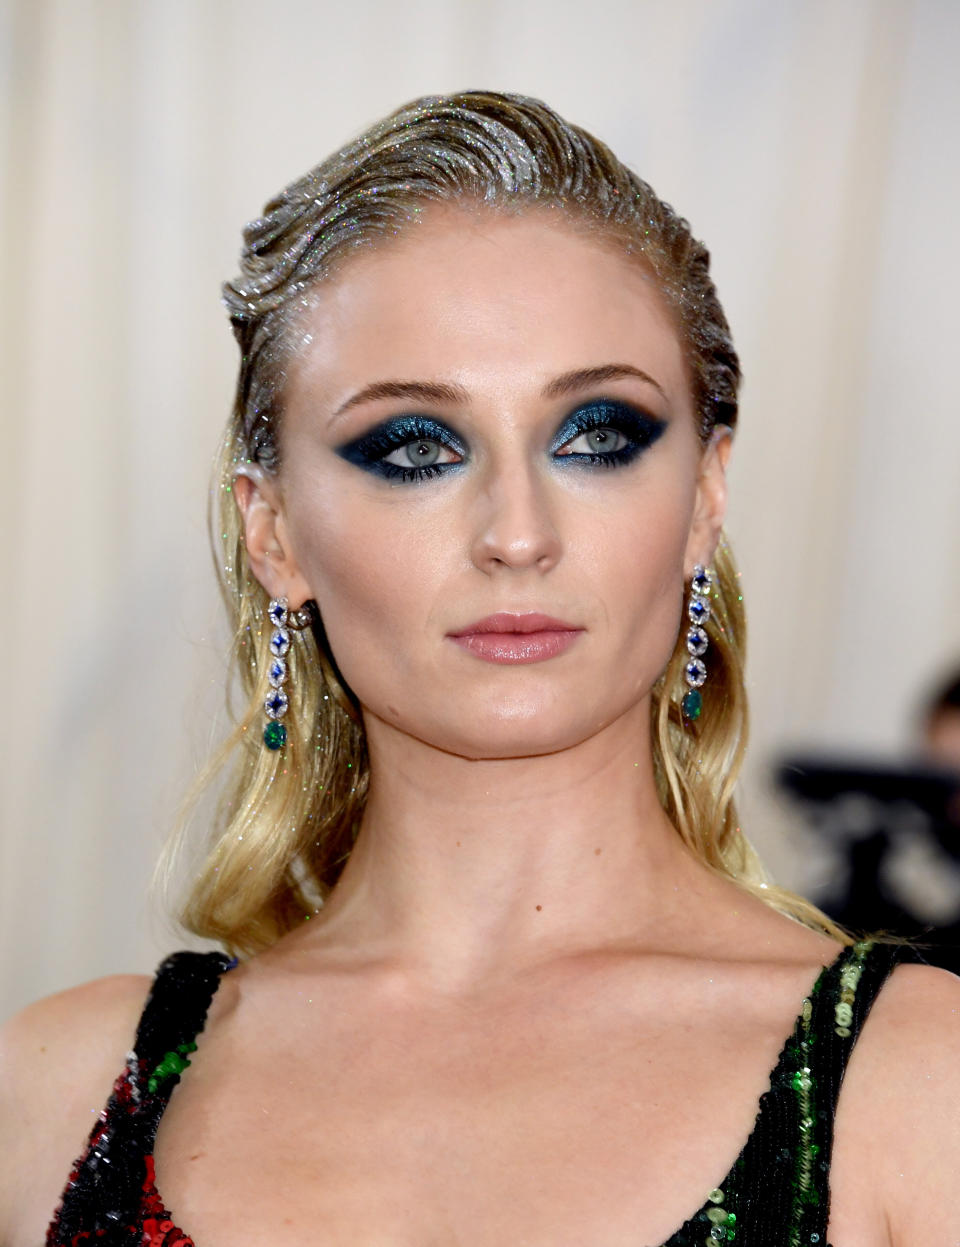 Sophie Turner at the Met Gala in New York City on May 6. Makeup by <a href="https://www.instagram.com/p/BxKSvzQg8hH/" target="_blank" rel="noopener noreferrer">Georgie Eisdell</a> using Pat McGrath products, hair by <a href="https://www.instagram.com/p/BxJC_2xJkMS/?utm_source=ig_embed" target="_blank" rel="noopener noreferrer">Christian Wood</a>.